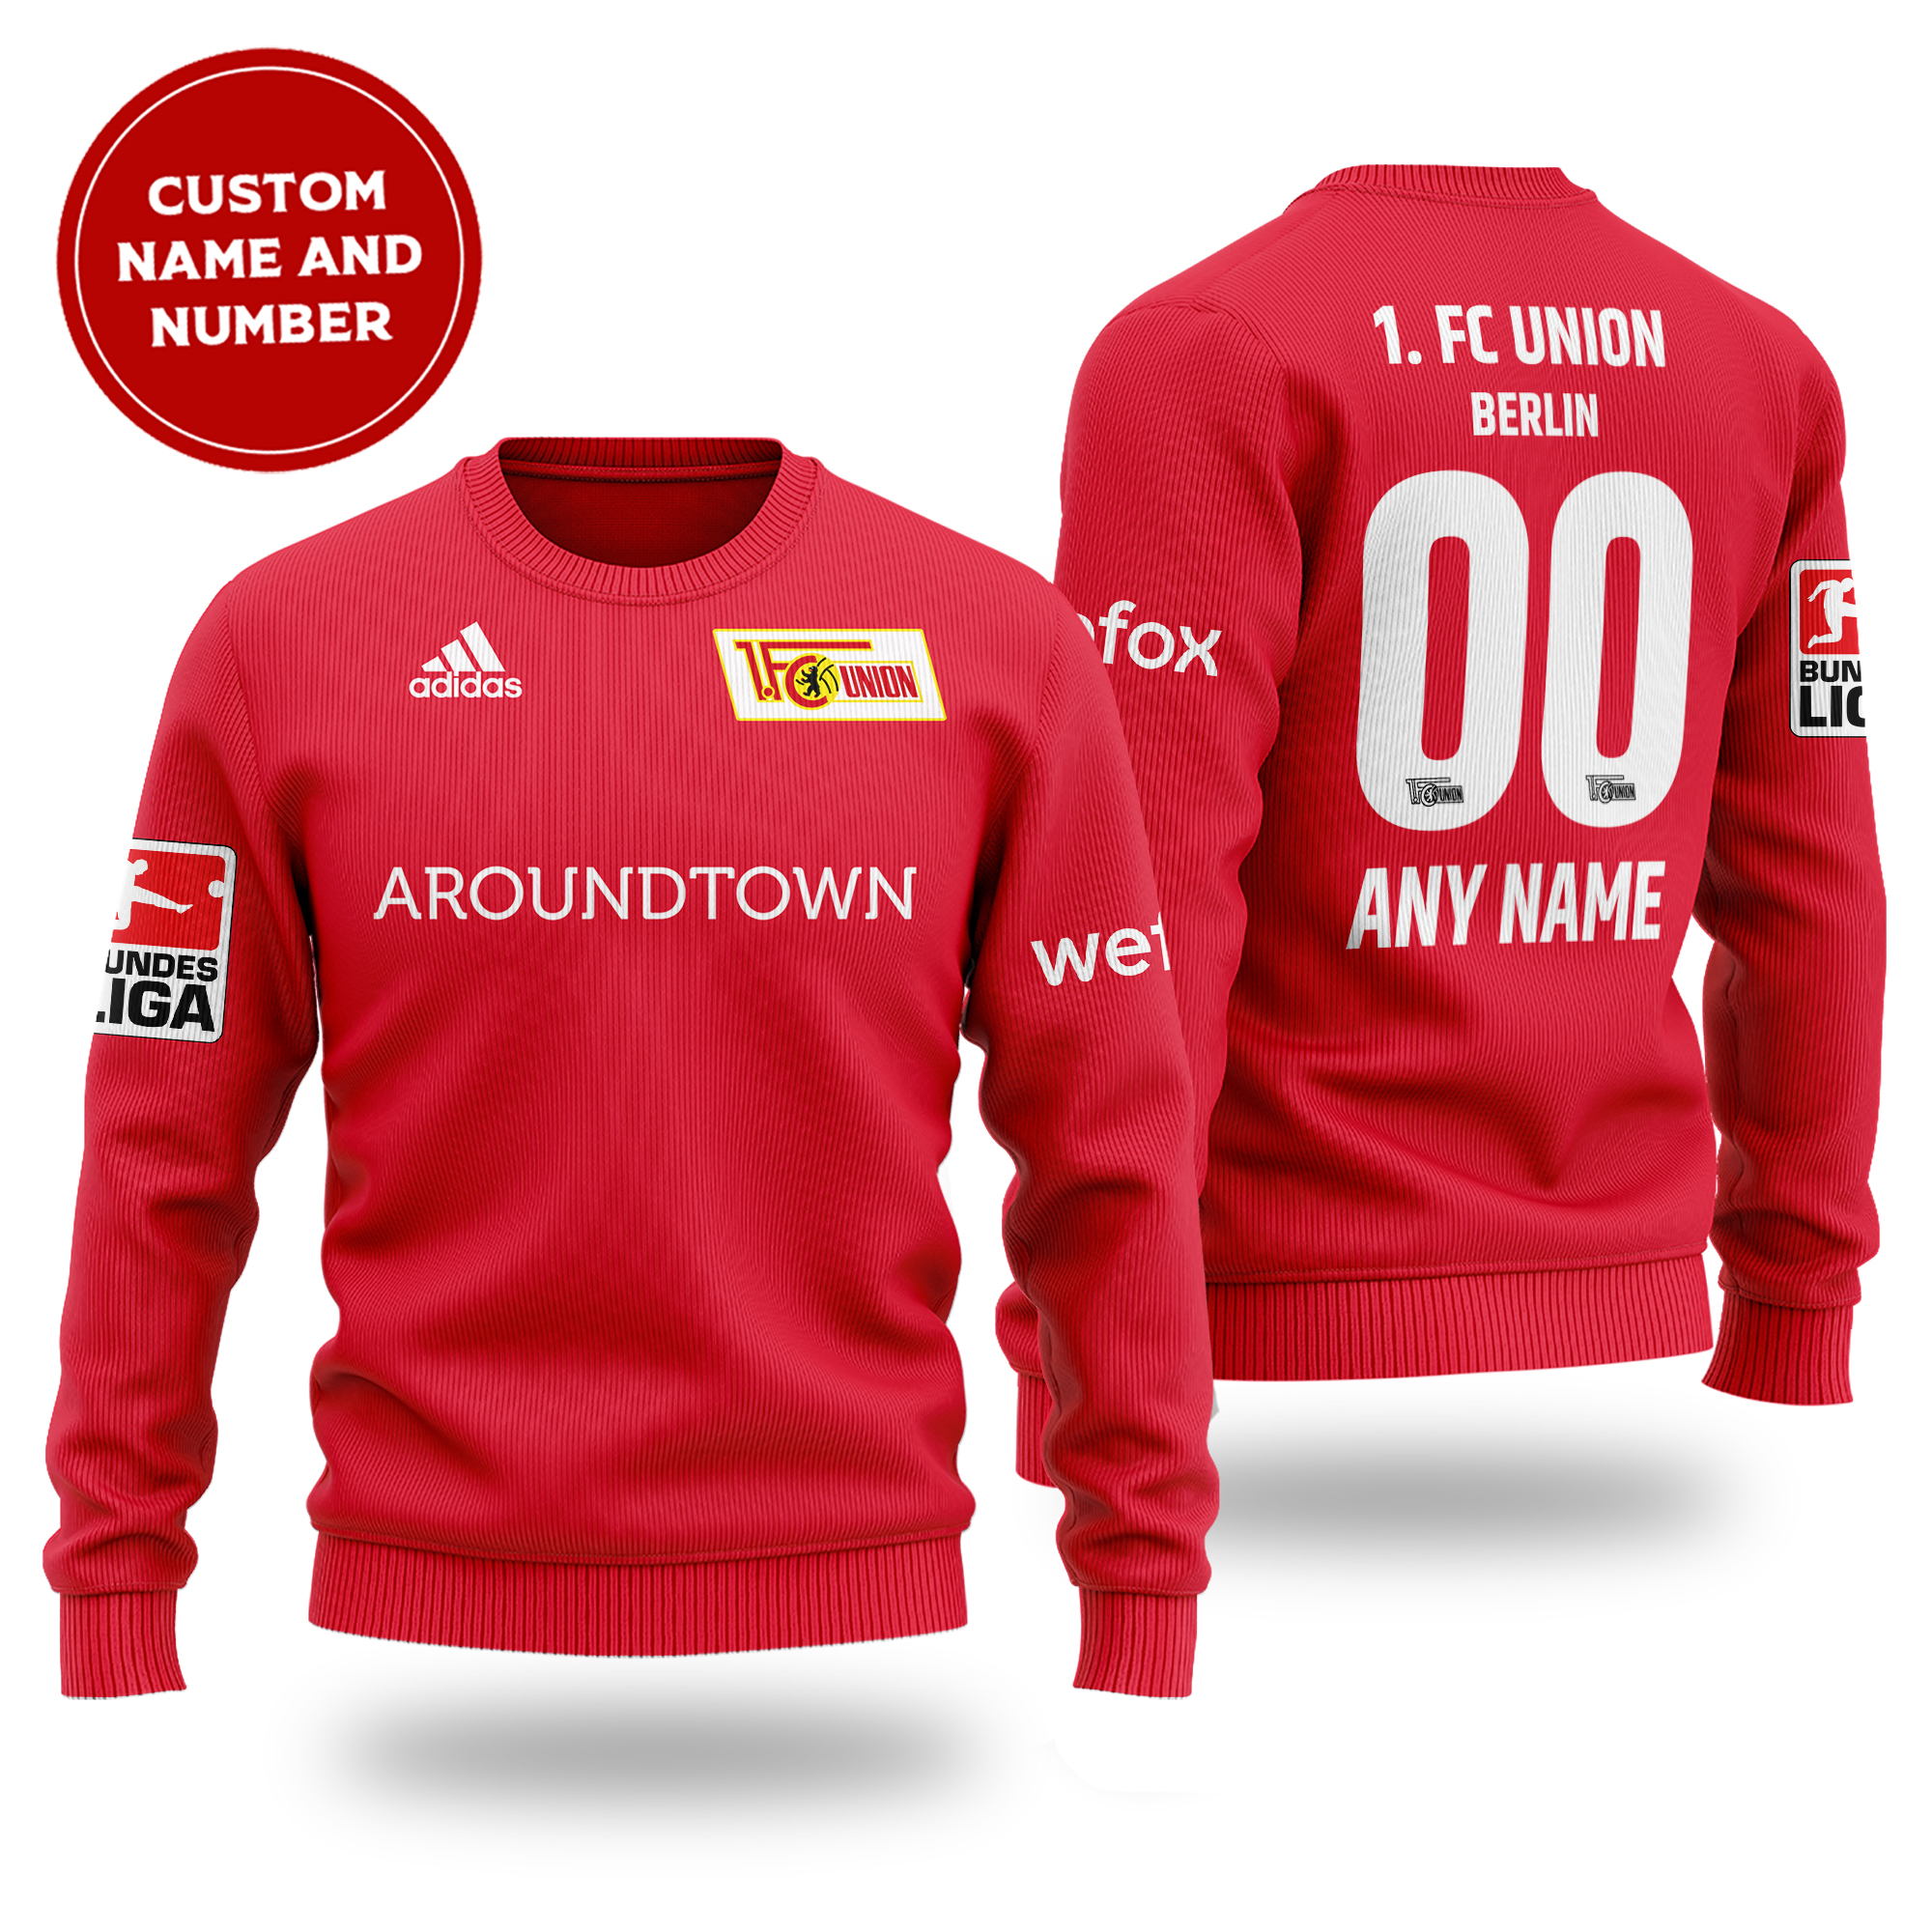 [ COOL ] FC Union Berlin custom name and number christmas wool sweater – Saleoff 271221